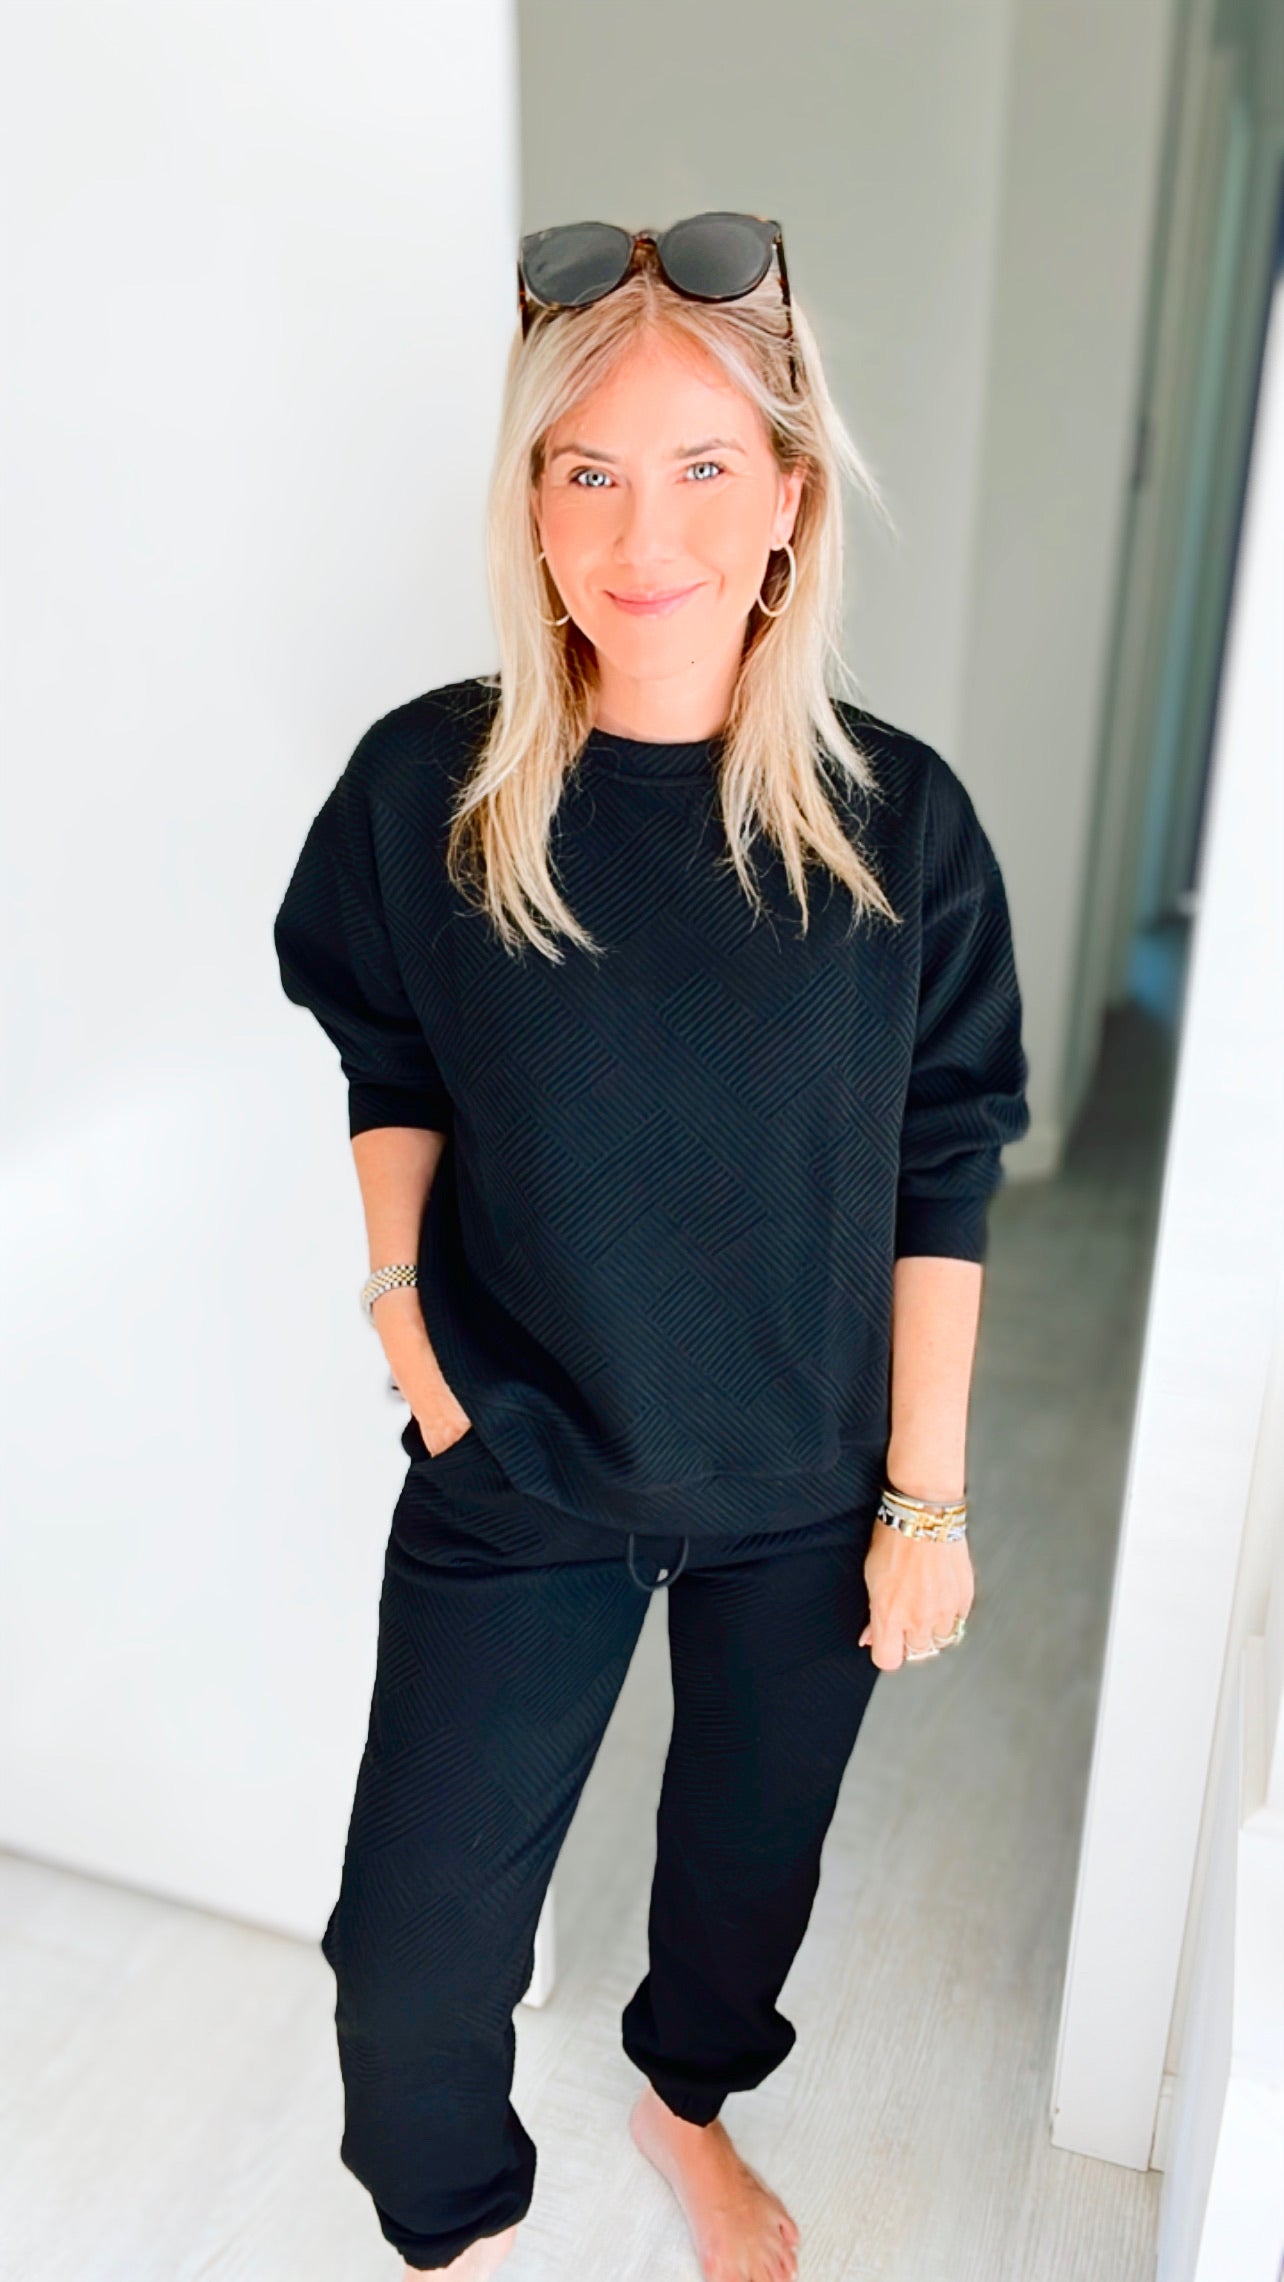 Taylor Textured Sweatshirt - Black-130 Long Sleeve Tops-See and Be Seen-Coastal Bloom Boutique, find the trendiest versions of the popular styles and looks Located in Indialantic, FL